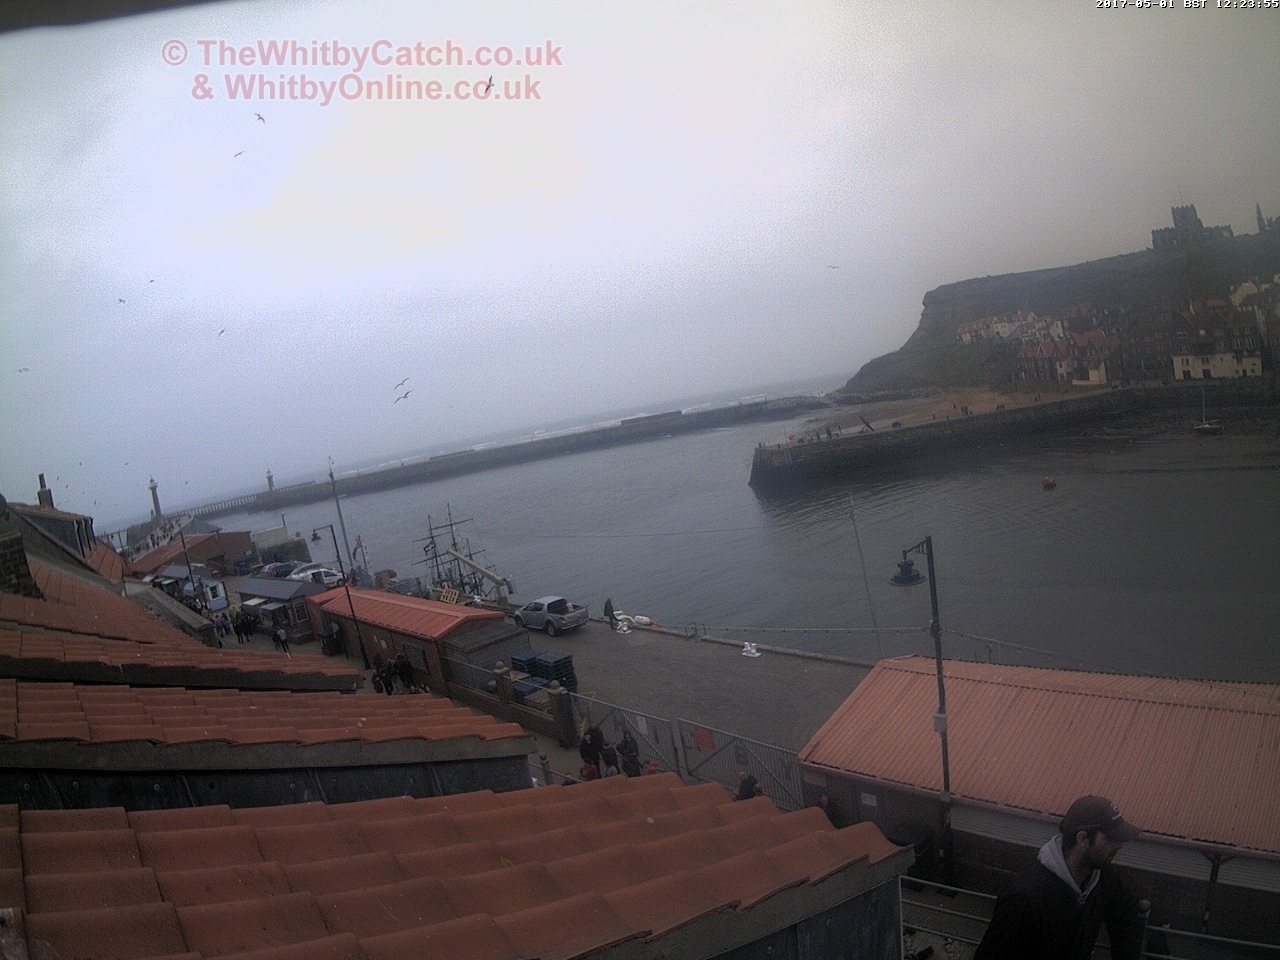 Whitby Mon 1st May 2017 12:24.